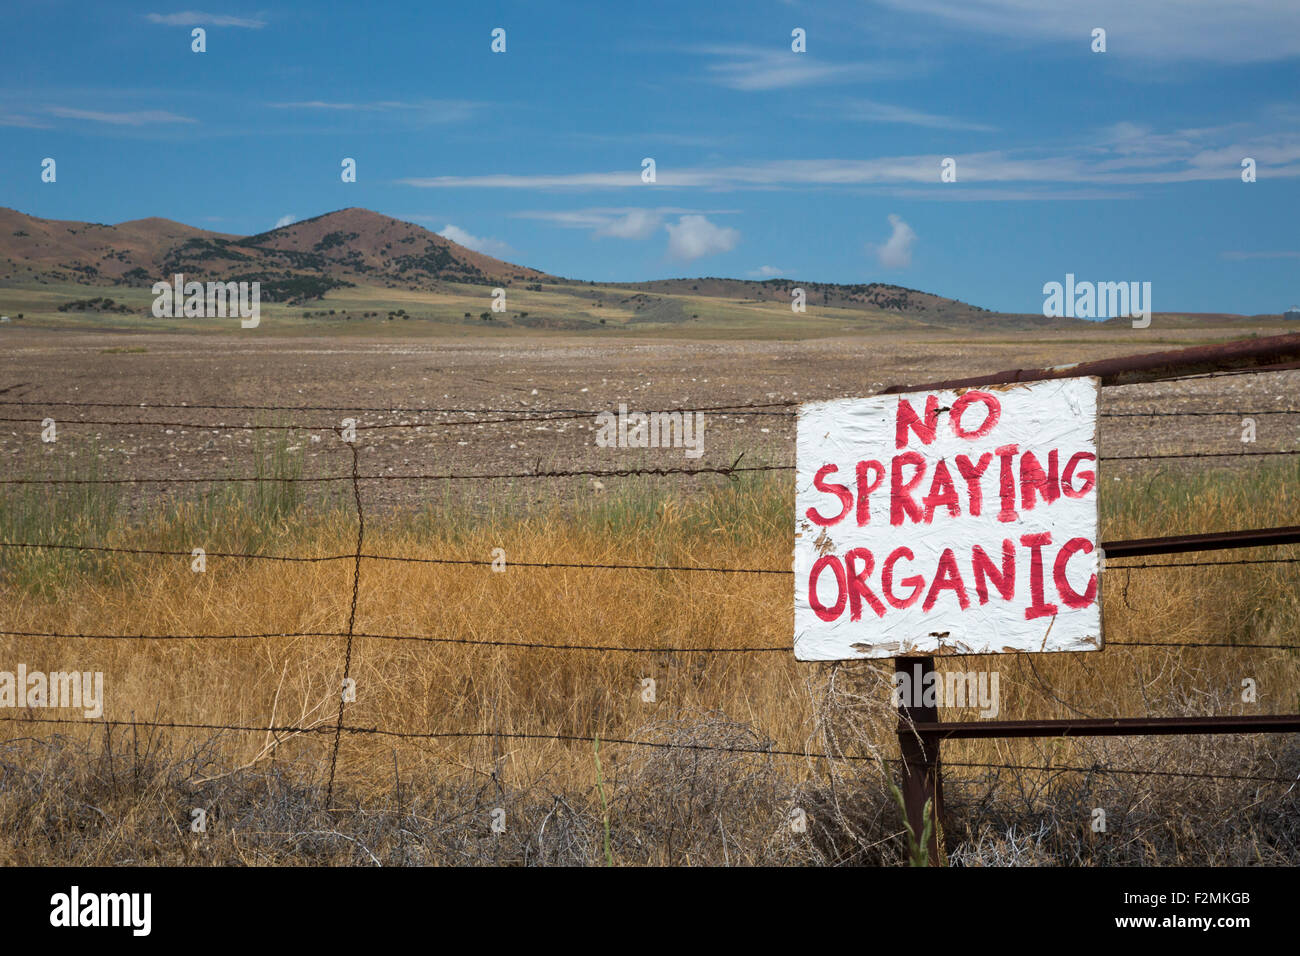 Promontory, Utah - A sign at a farmer's field warns against spraying because the farm is organic. Stock Photo